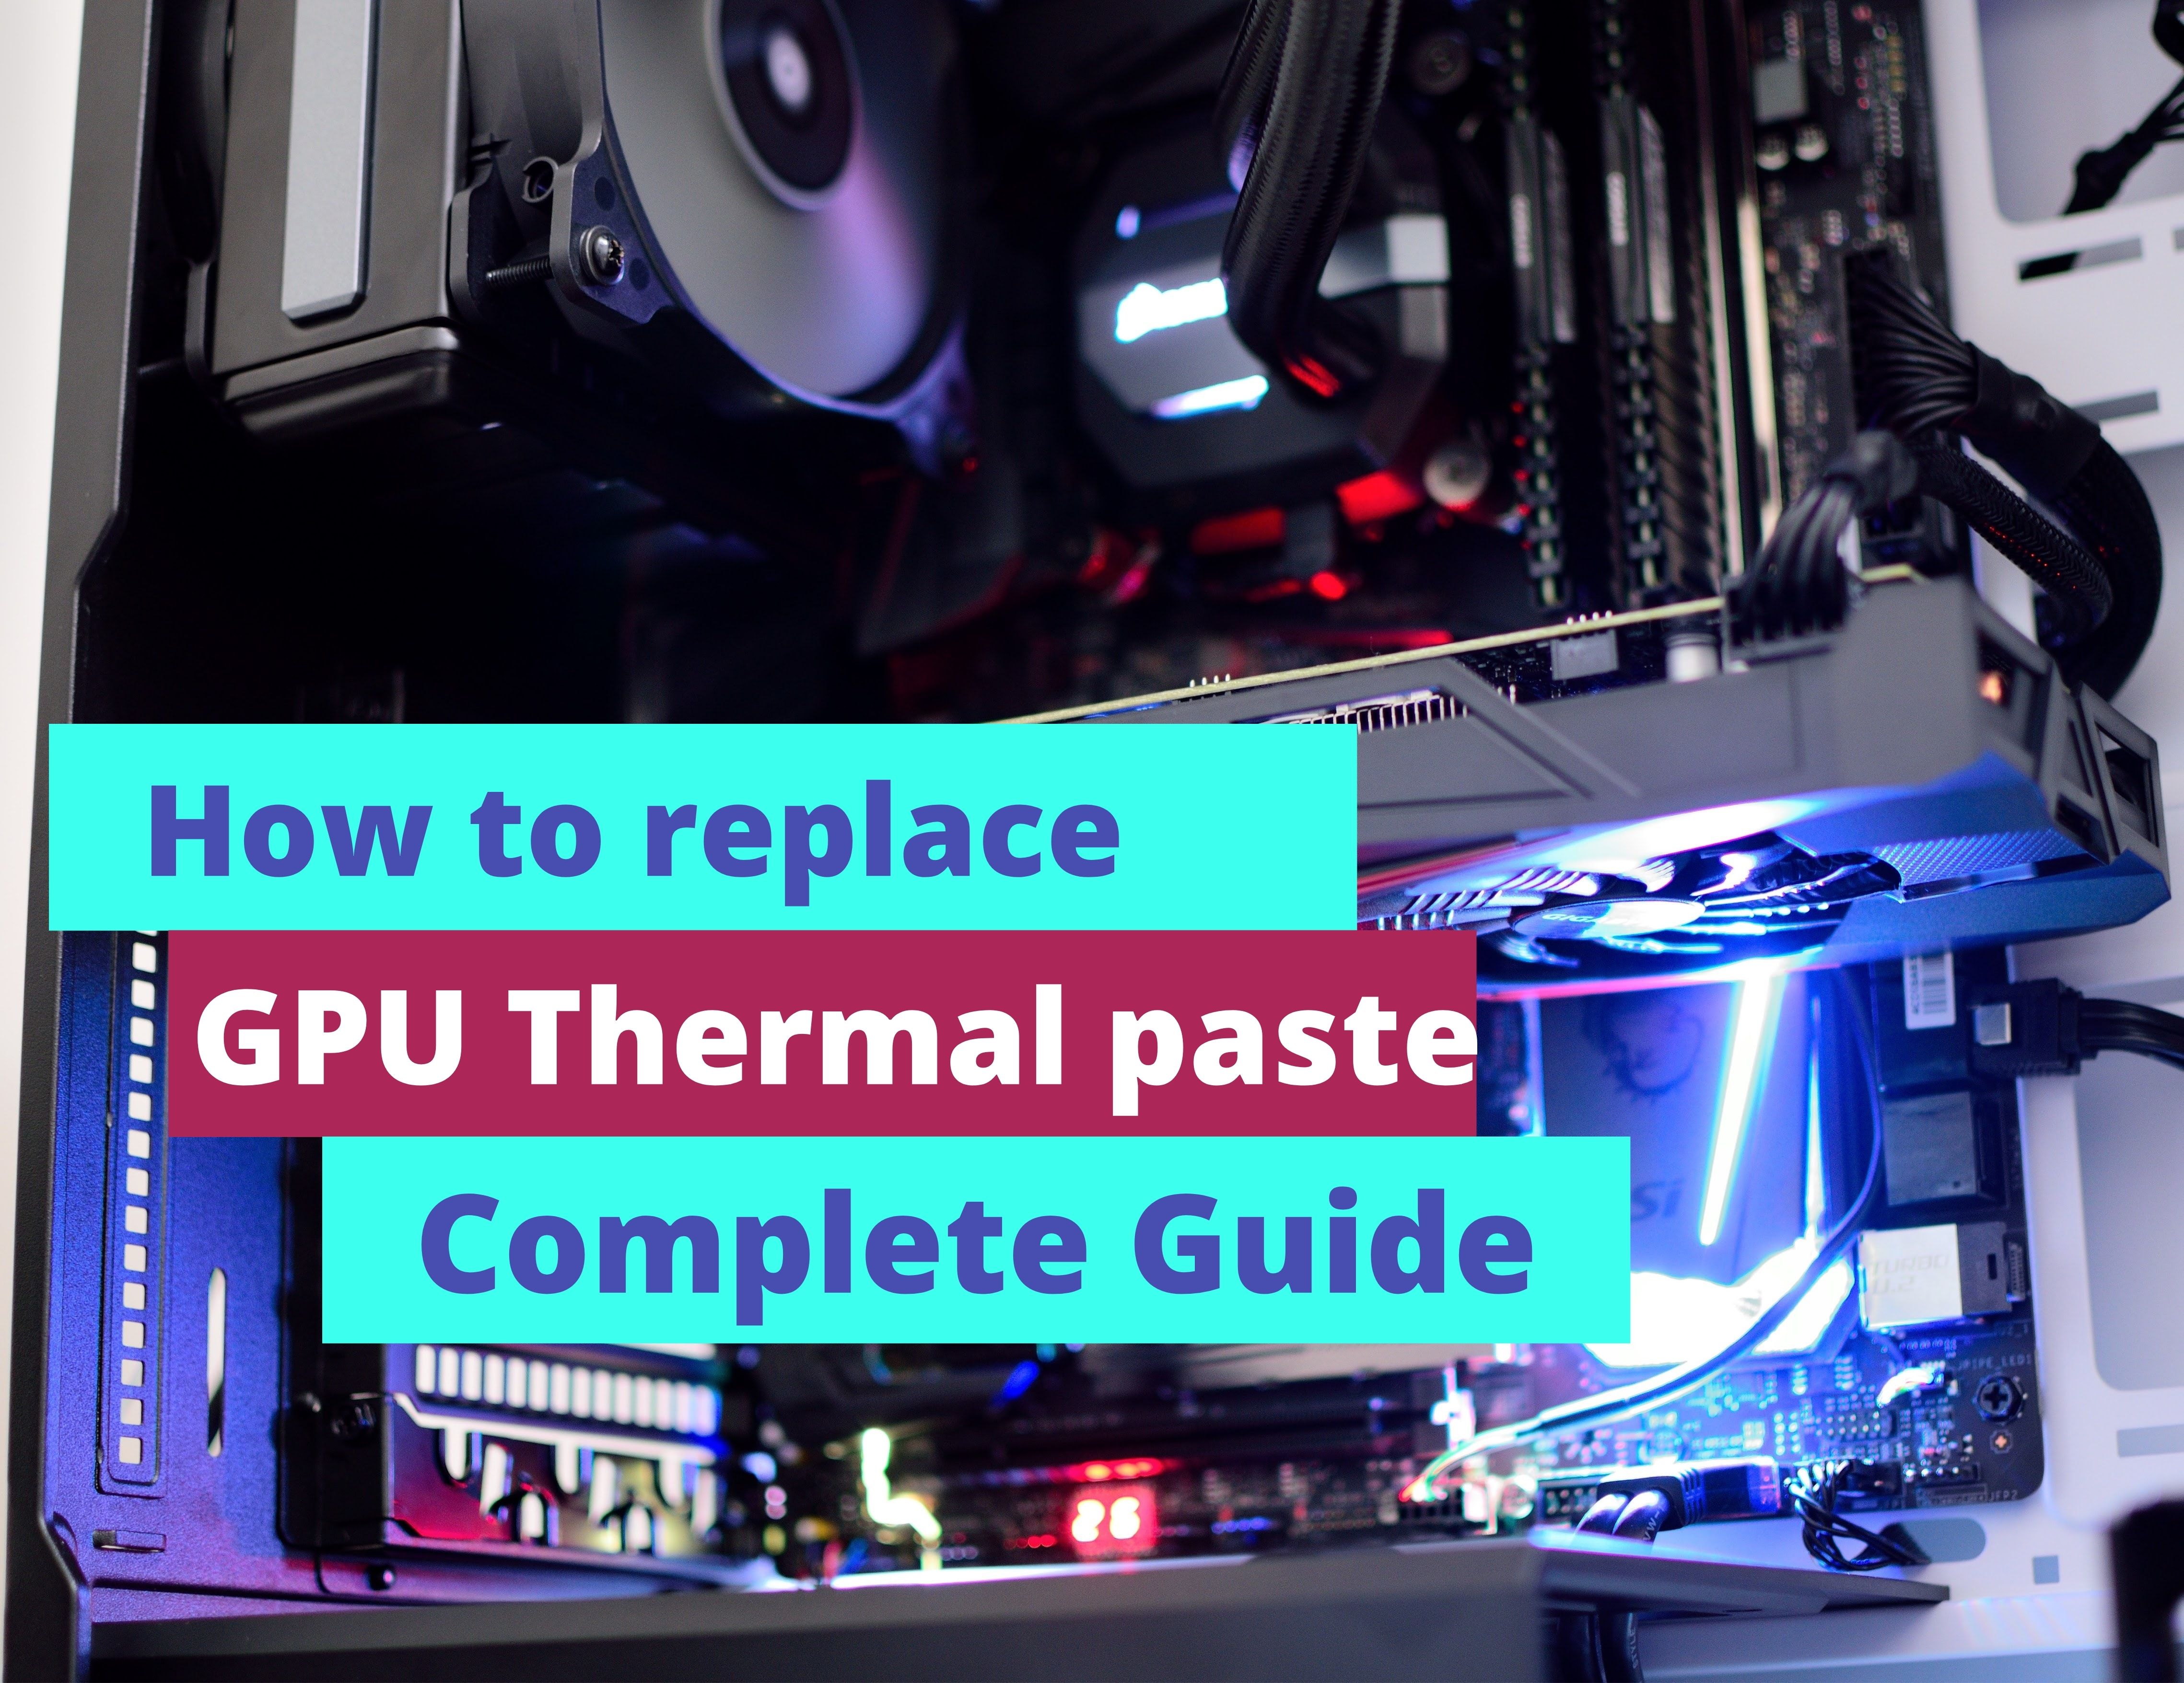 How to replace GPU thermal paste?